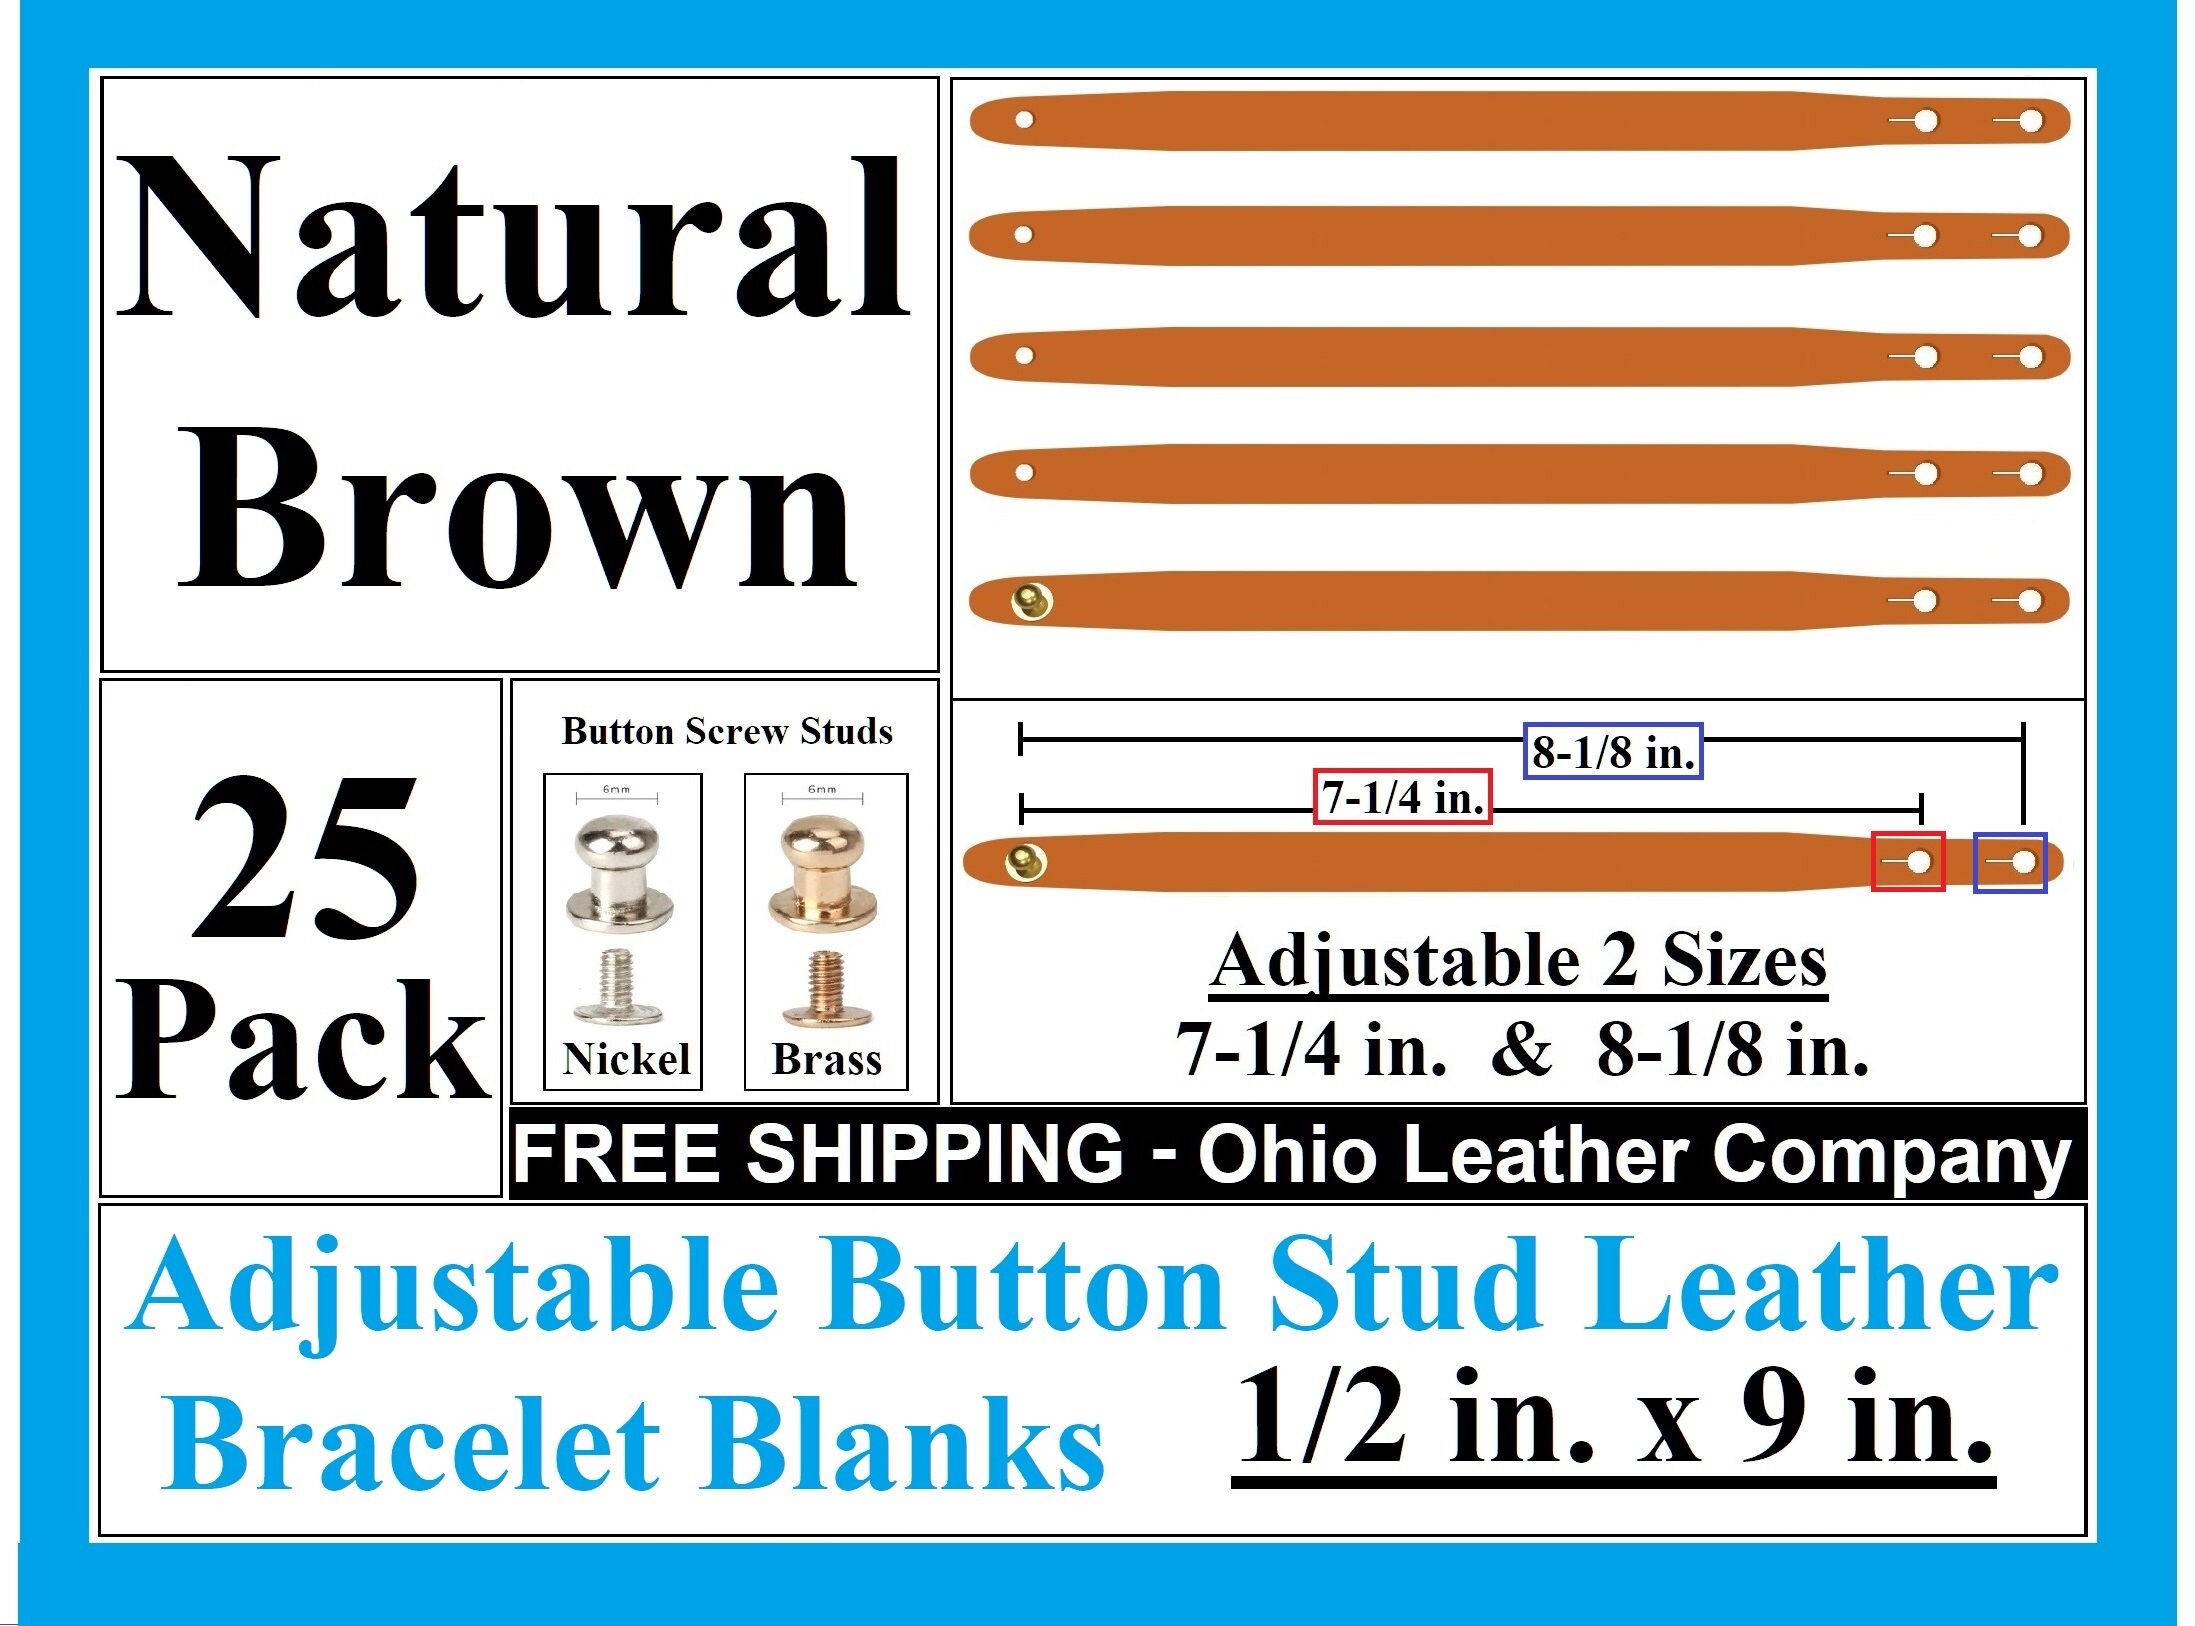 Leather bracelet blanks 15 Pack 8 oz Natural Brown 1 inch X 7 to 11 inch 